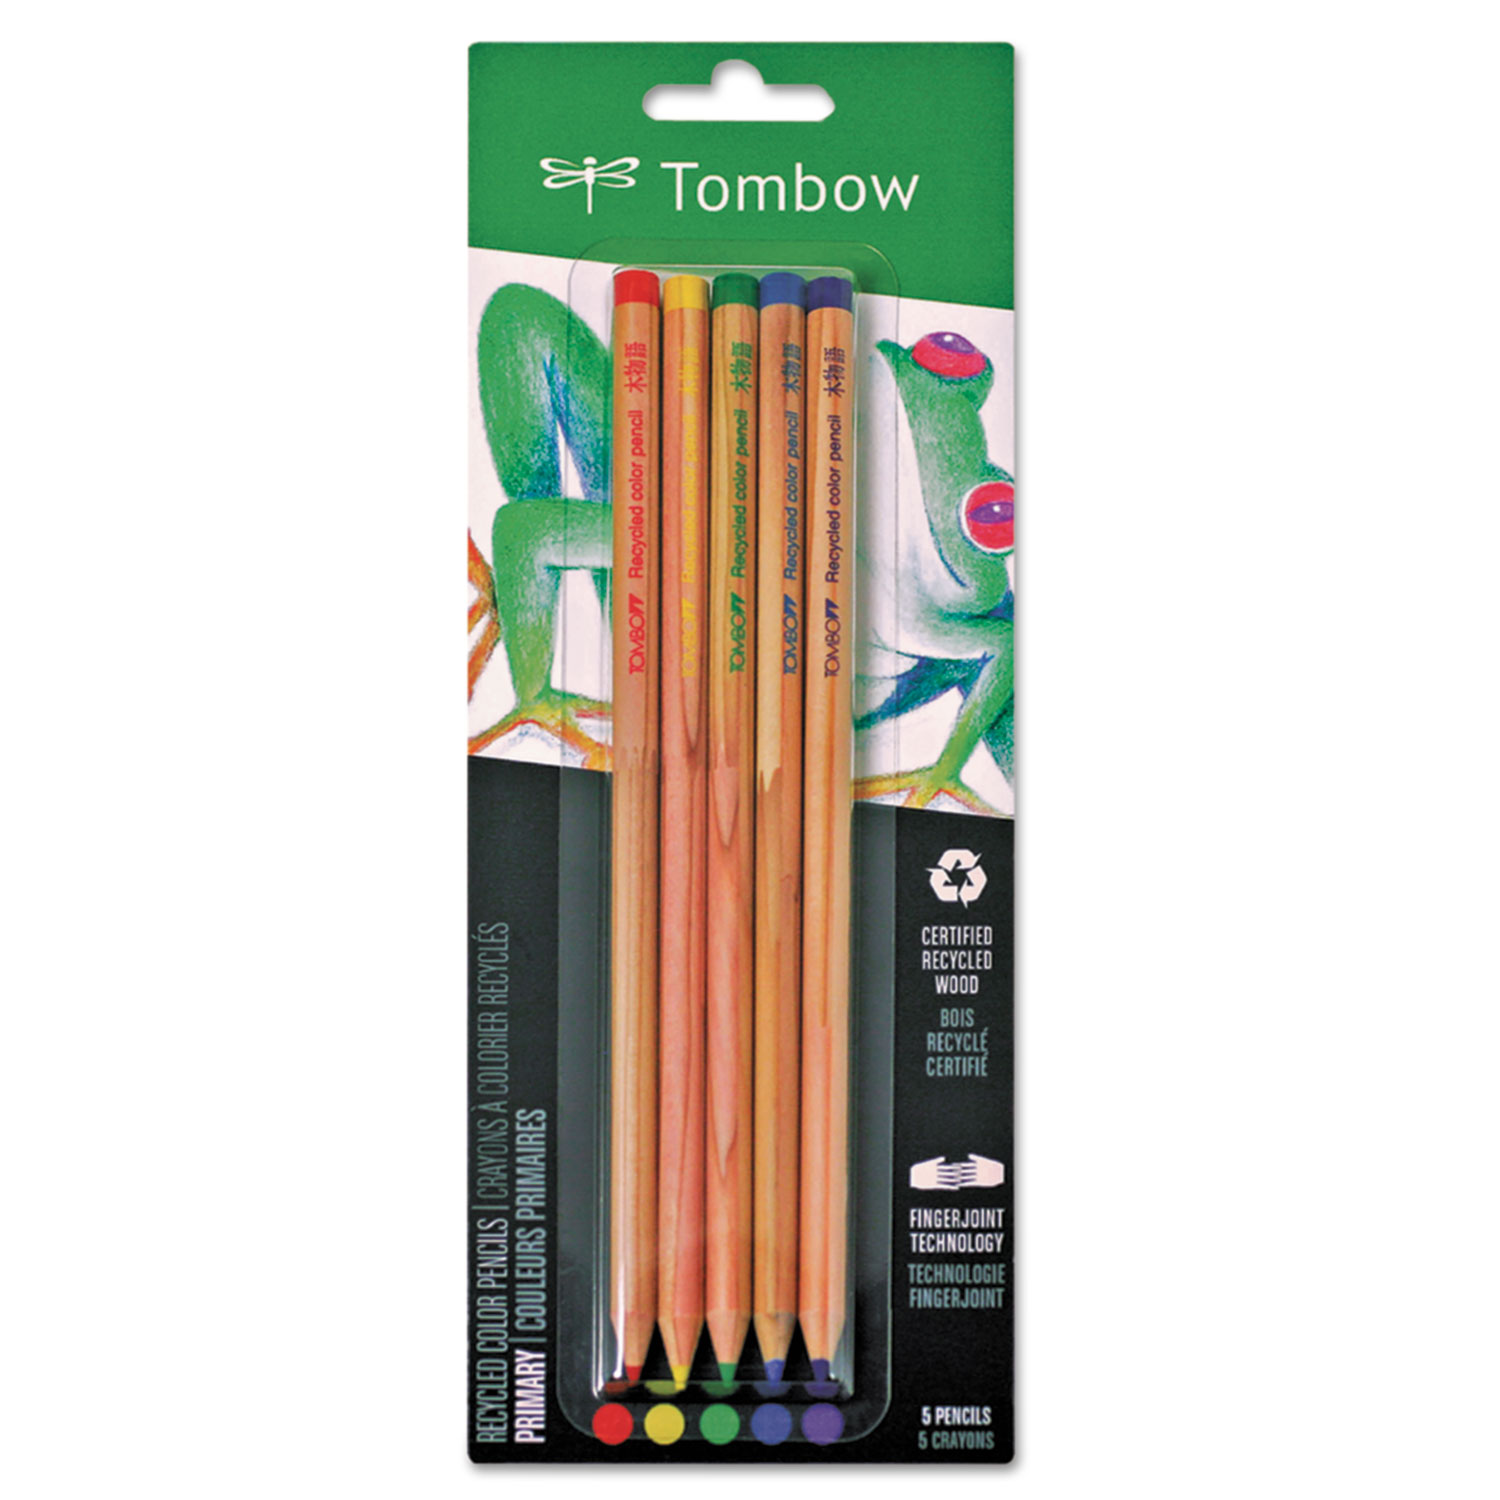  Tombow 61550 Recycled Colored Pencils, 3.05 mm, Assorted Lead Colors, Natural Woodgrain Barrel, 5/Set (TOM61550) 